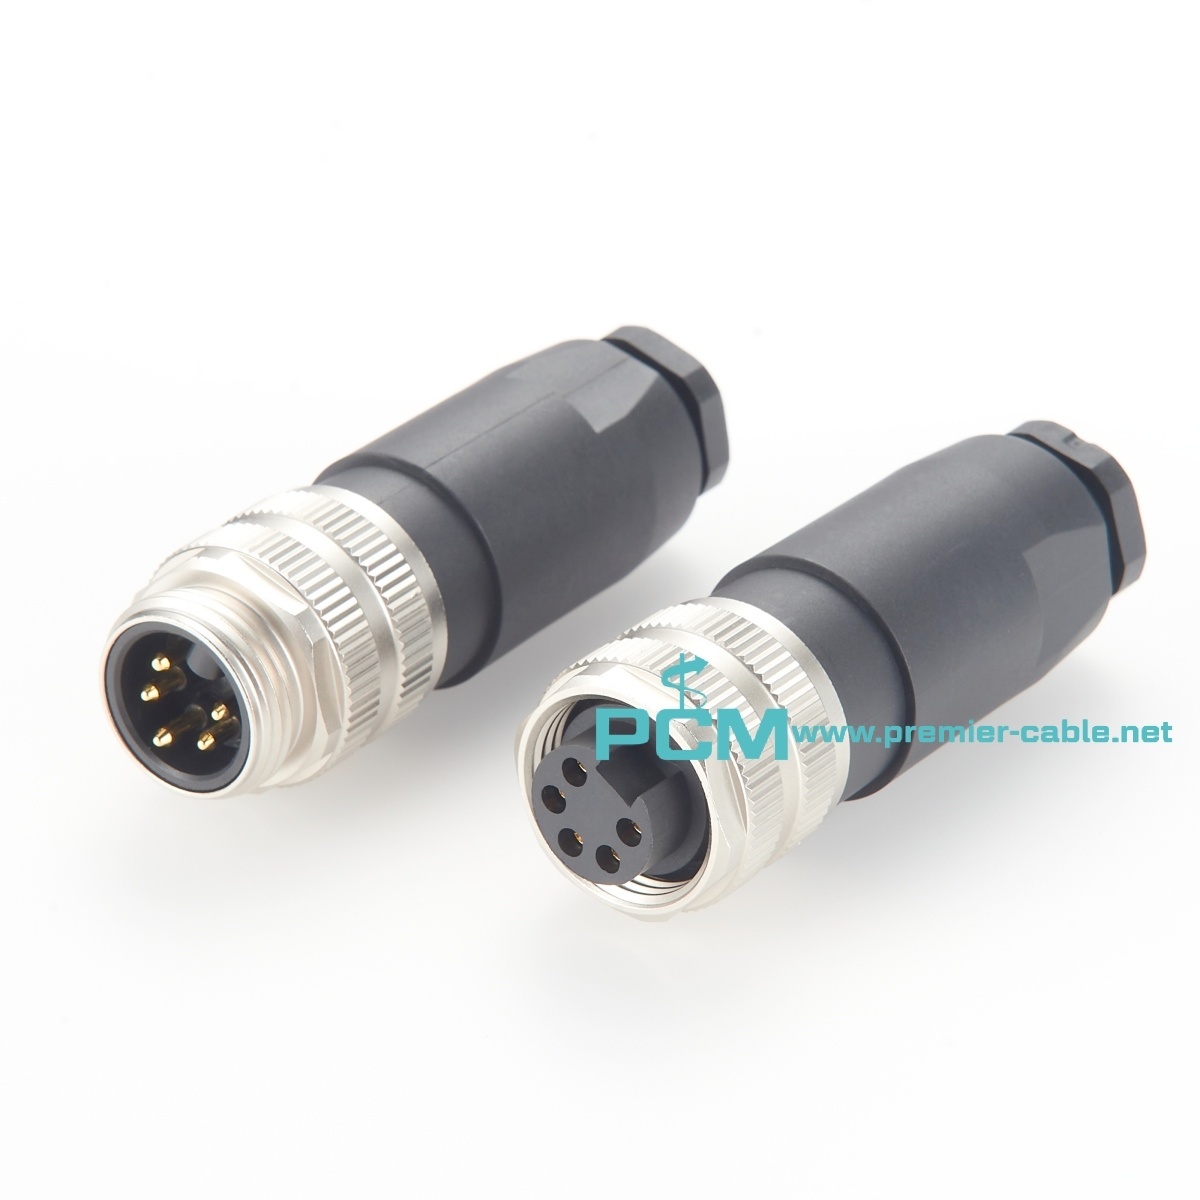  7/8" Mini Change field wireable connector